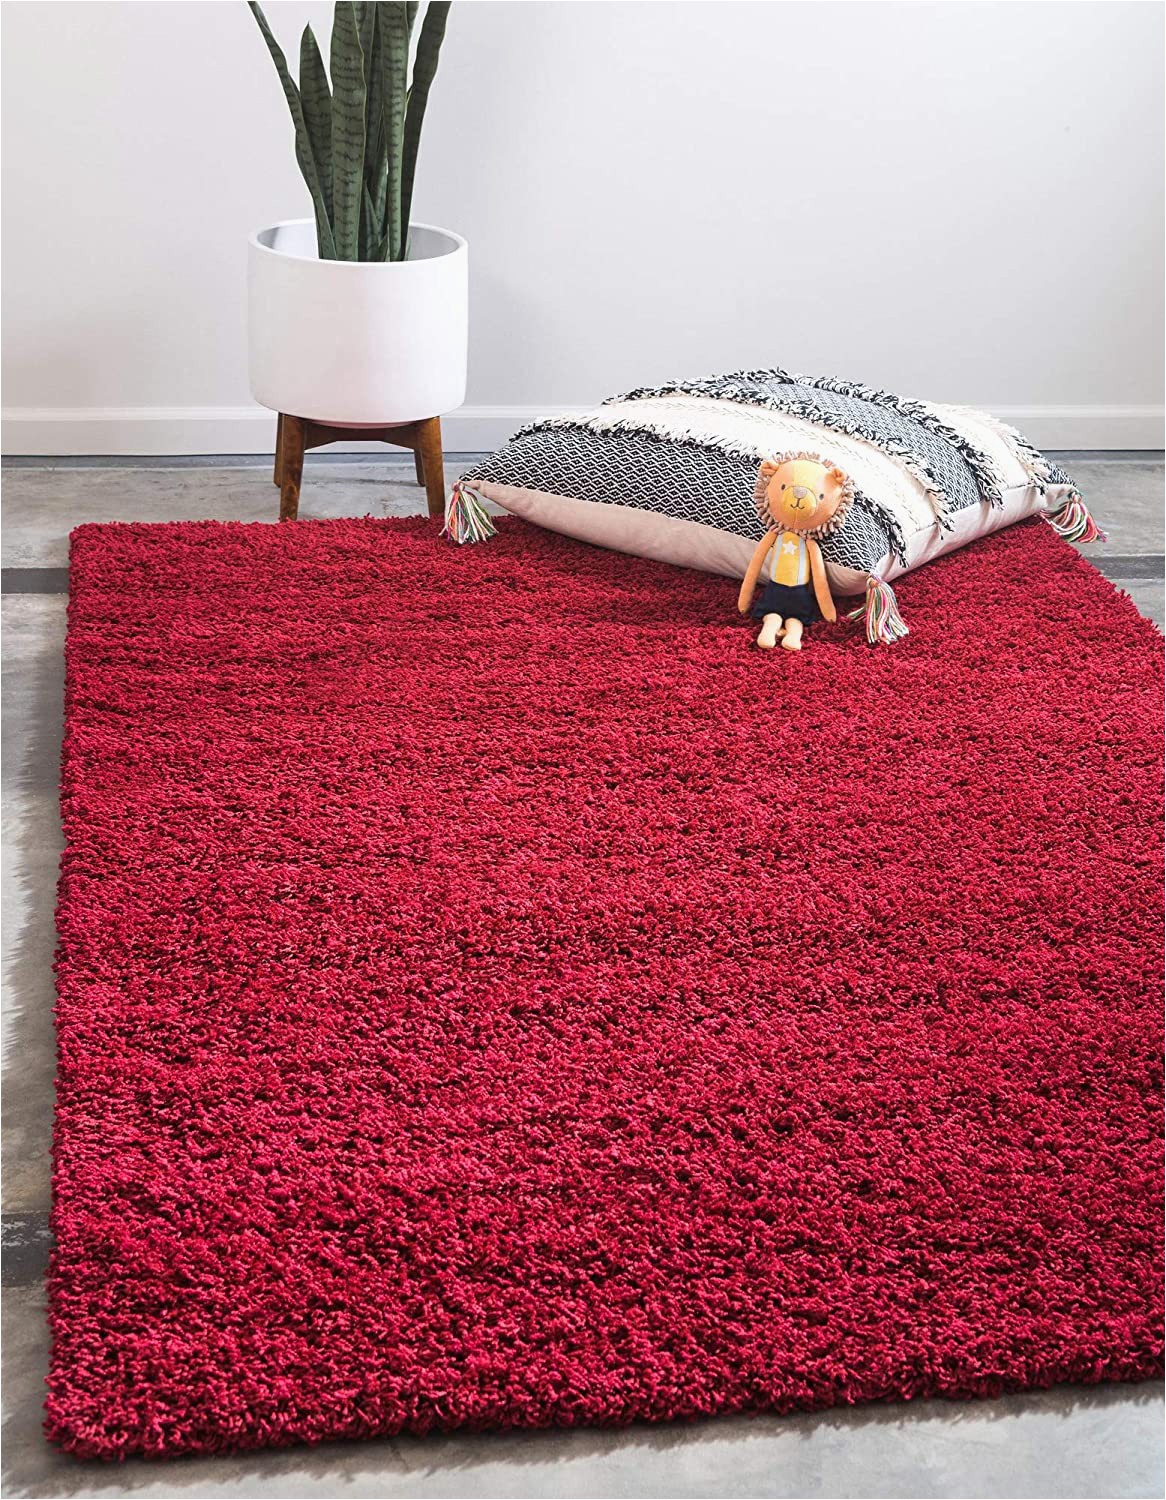 Cherry Red Bathroom Rugs Unique Loom solo solid Shag Collection Modern Plush Cherry Red area Rug 4 0 X 6 0